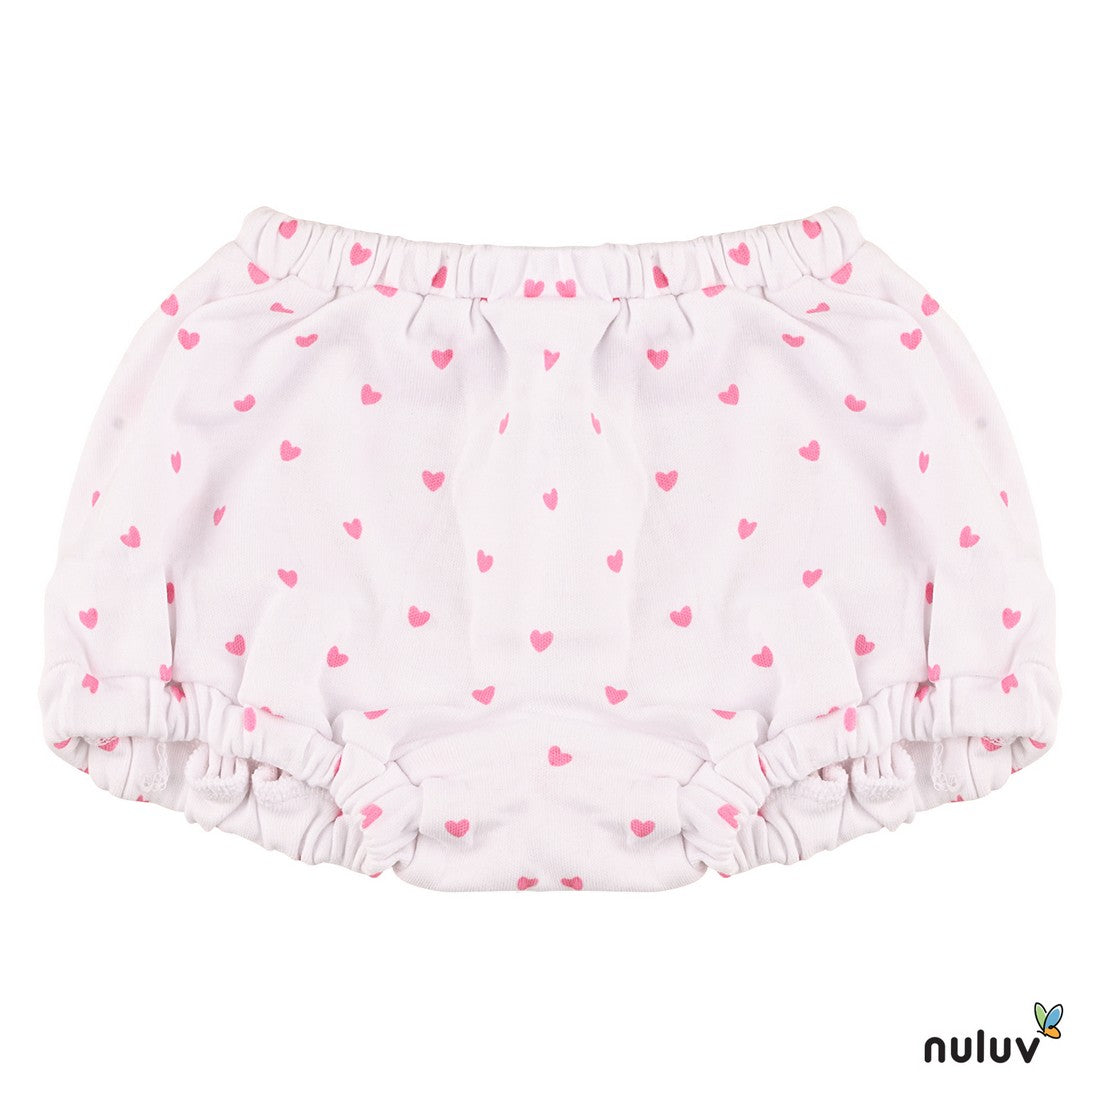 Nuluv Girl's Panty - Style Bloomer